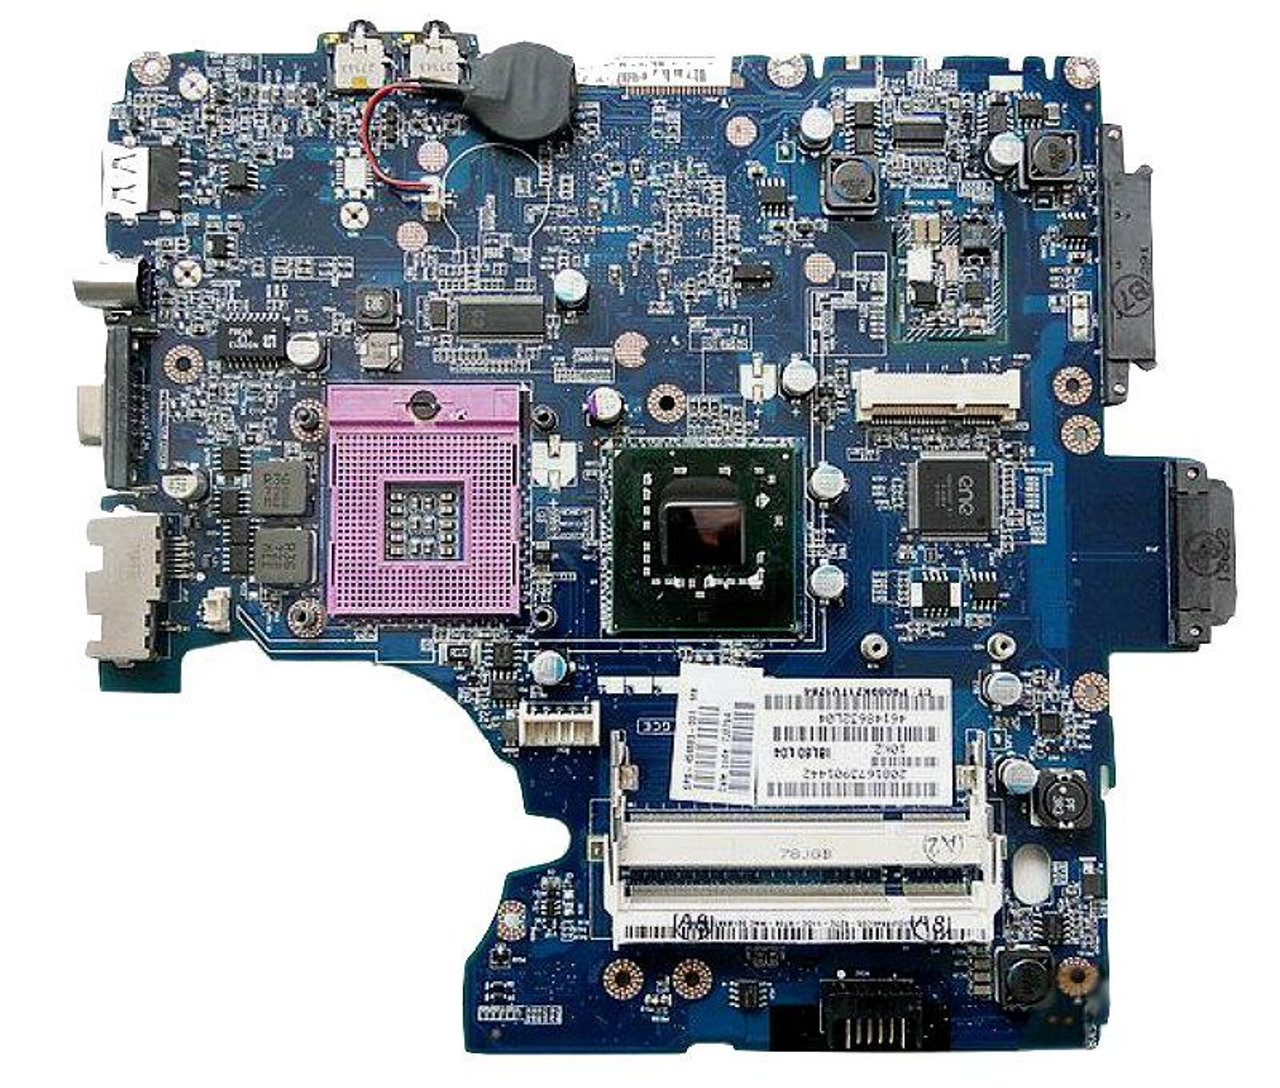 453495-001 HP System Board (Motherboard) for Compaq C700 (Refurbished)